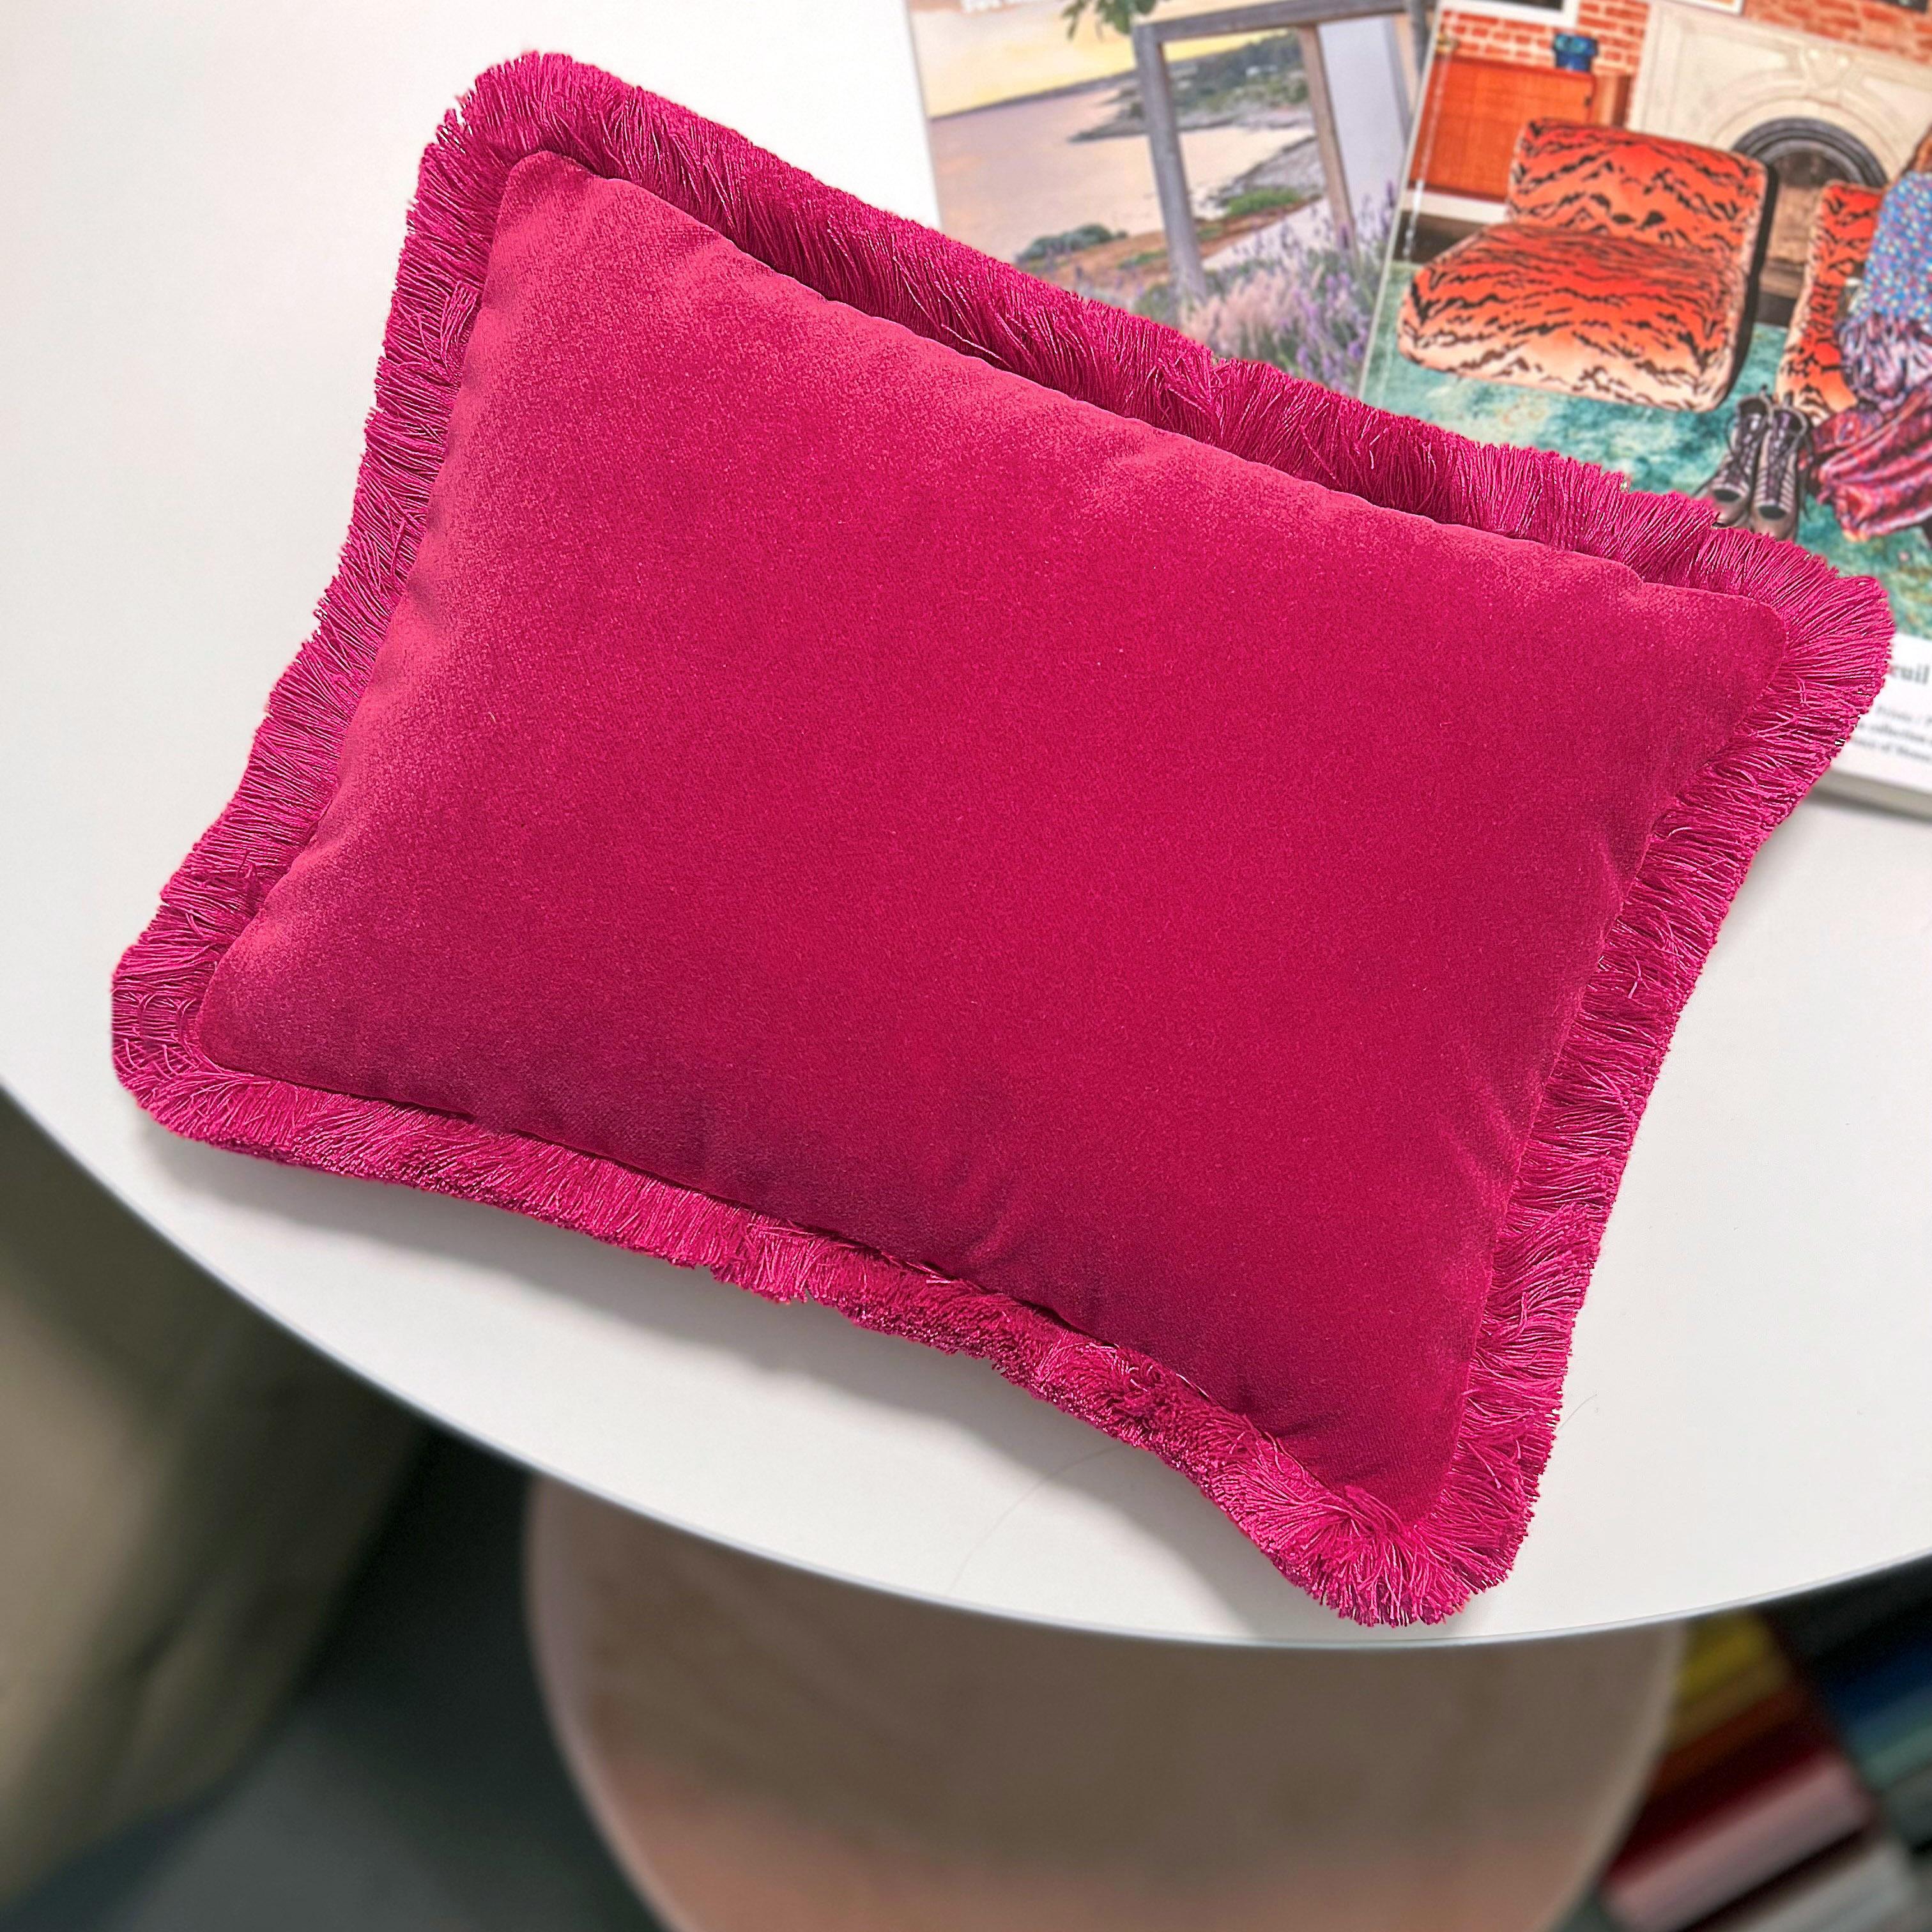 Tailored quality meets stylish allure in this stunning cushion, ideal to increase the comfort of a bed or sofa while not renouncing glamour. The rich inner padding is enveloped in prized velvet, offered in a vibrant combination of solid fuchsia